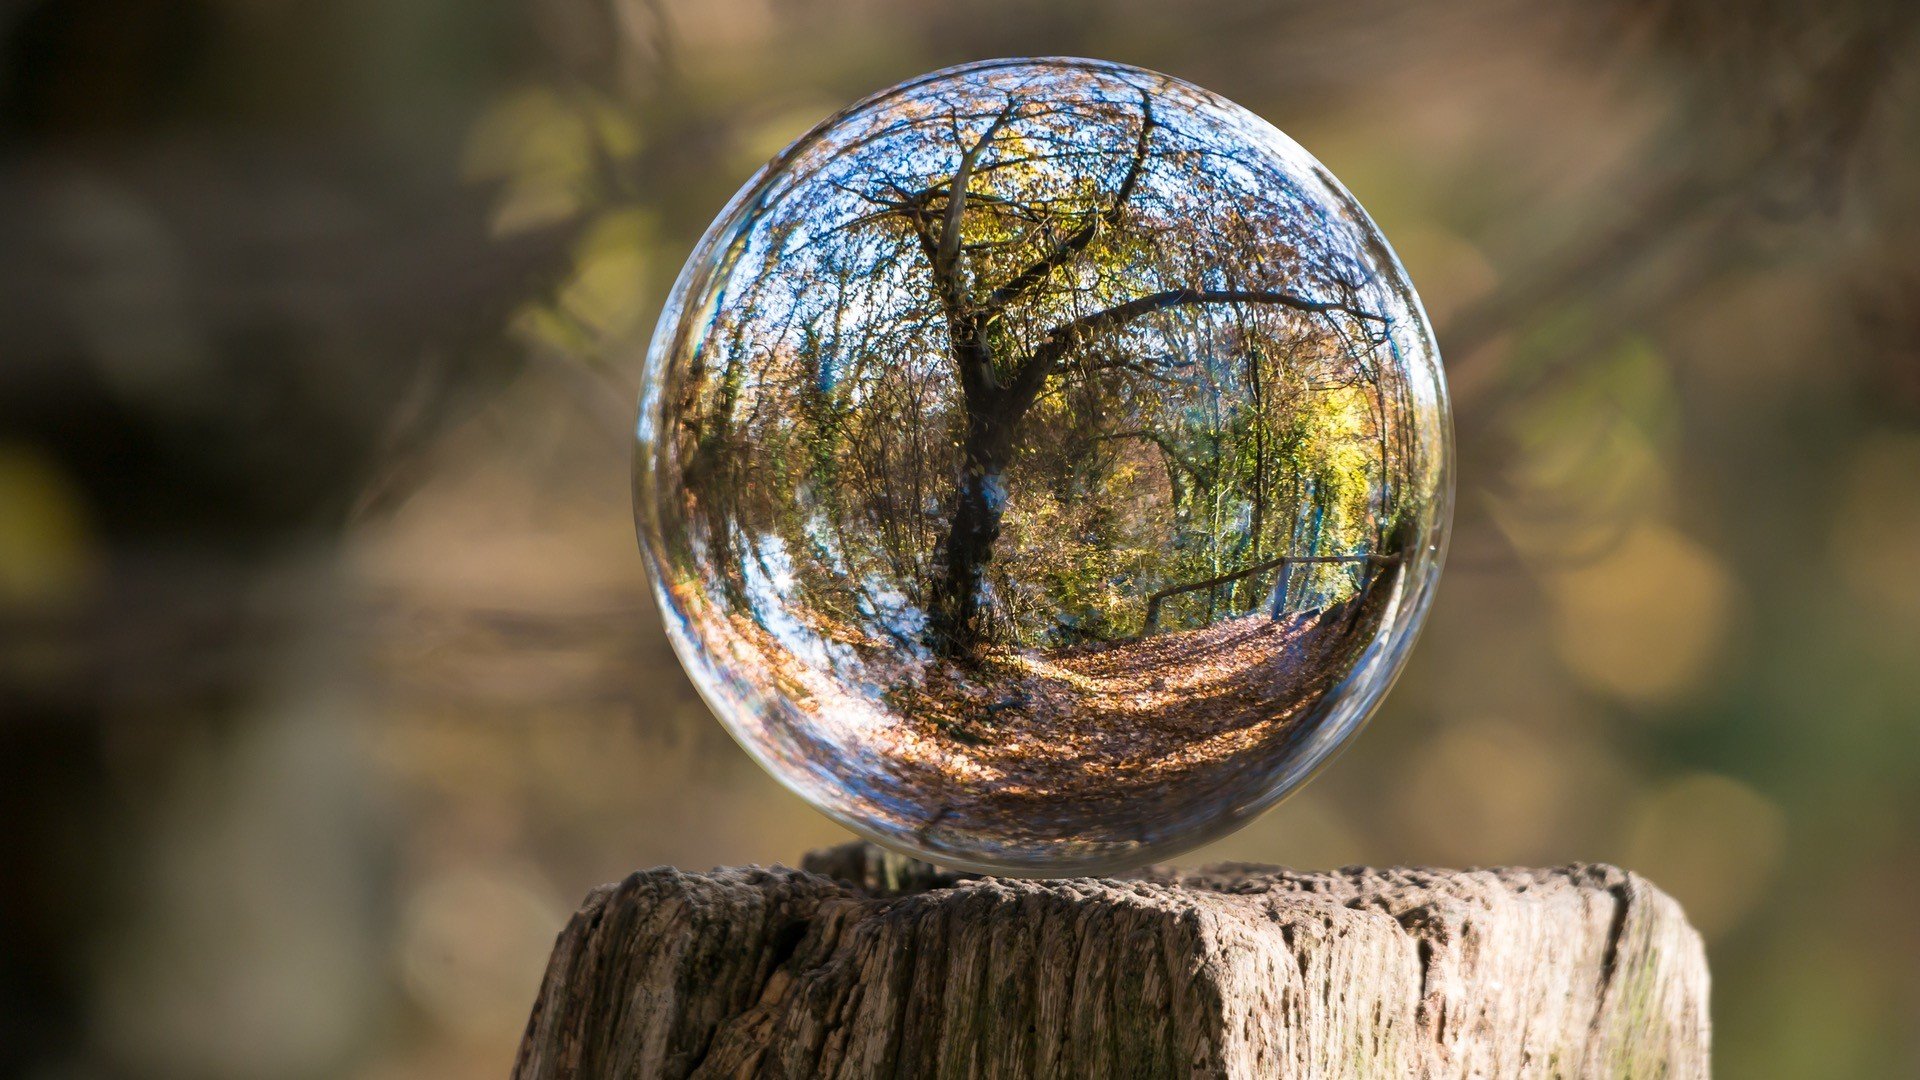 nature, Landscape, Trunks, Wood, Sphere, Glass, Reflection, Trees, Fall, Leaves, Depth of field, Distortion Wallpaper